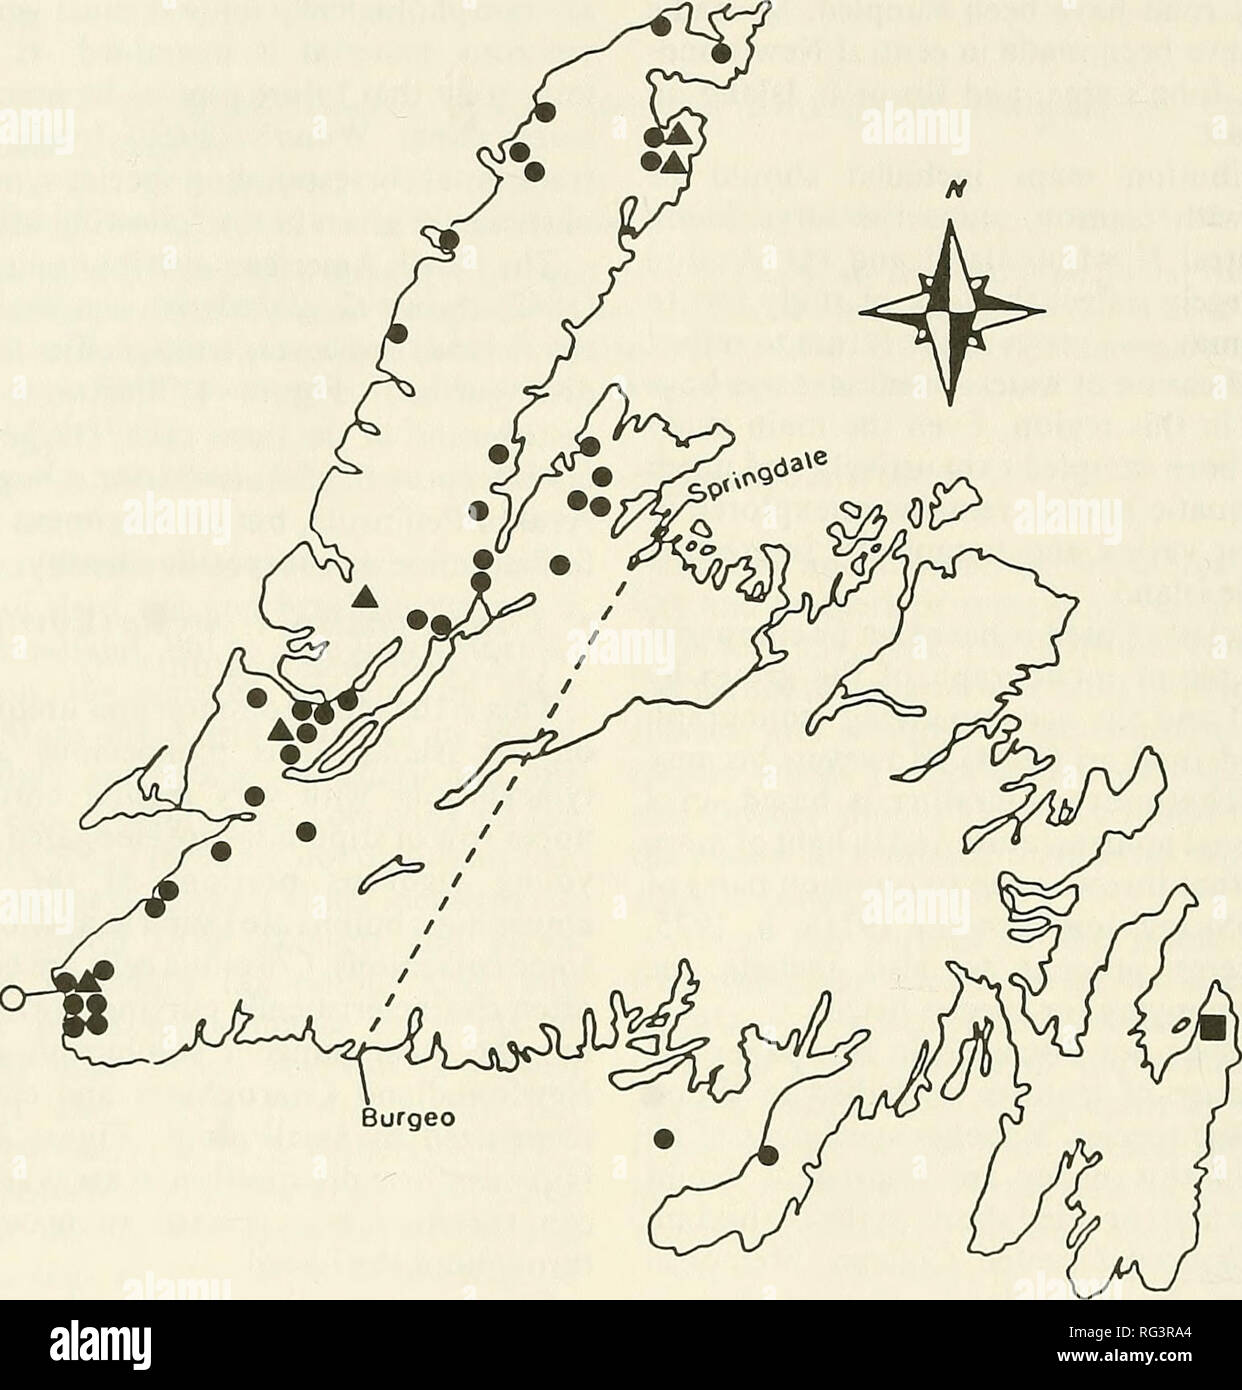 . The Canadian field-naturalist. 36 The Canadian Field-Naturalist Vol. 103. Figure 1. Distribution of C. globularis Thuill. in insular Newfoundland. â¢ = f. virgata A = f. globularis O = f. aspera â = f. unknown c. Chara globularis f. aspera (Deth. ex. Willd.) R.D.W. {-C. aspera Deth. ex. Willd.) This dioecious Chara is considered by many to be a distinct species or species complex rather than a form of C. globularis (Forsberg 1963; Croy 1982; Krause 1983), and Proctor (1971a) has shown that it is reproductively isolated from other members of the Chara globularis complex. The Newfoundland popu Stock Photo